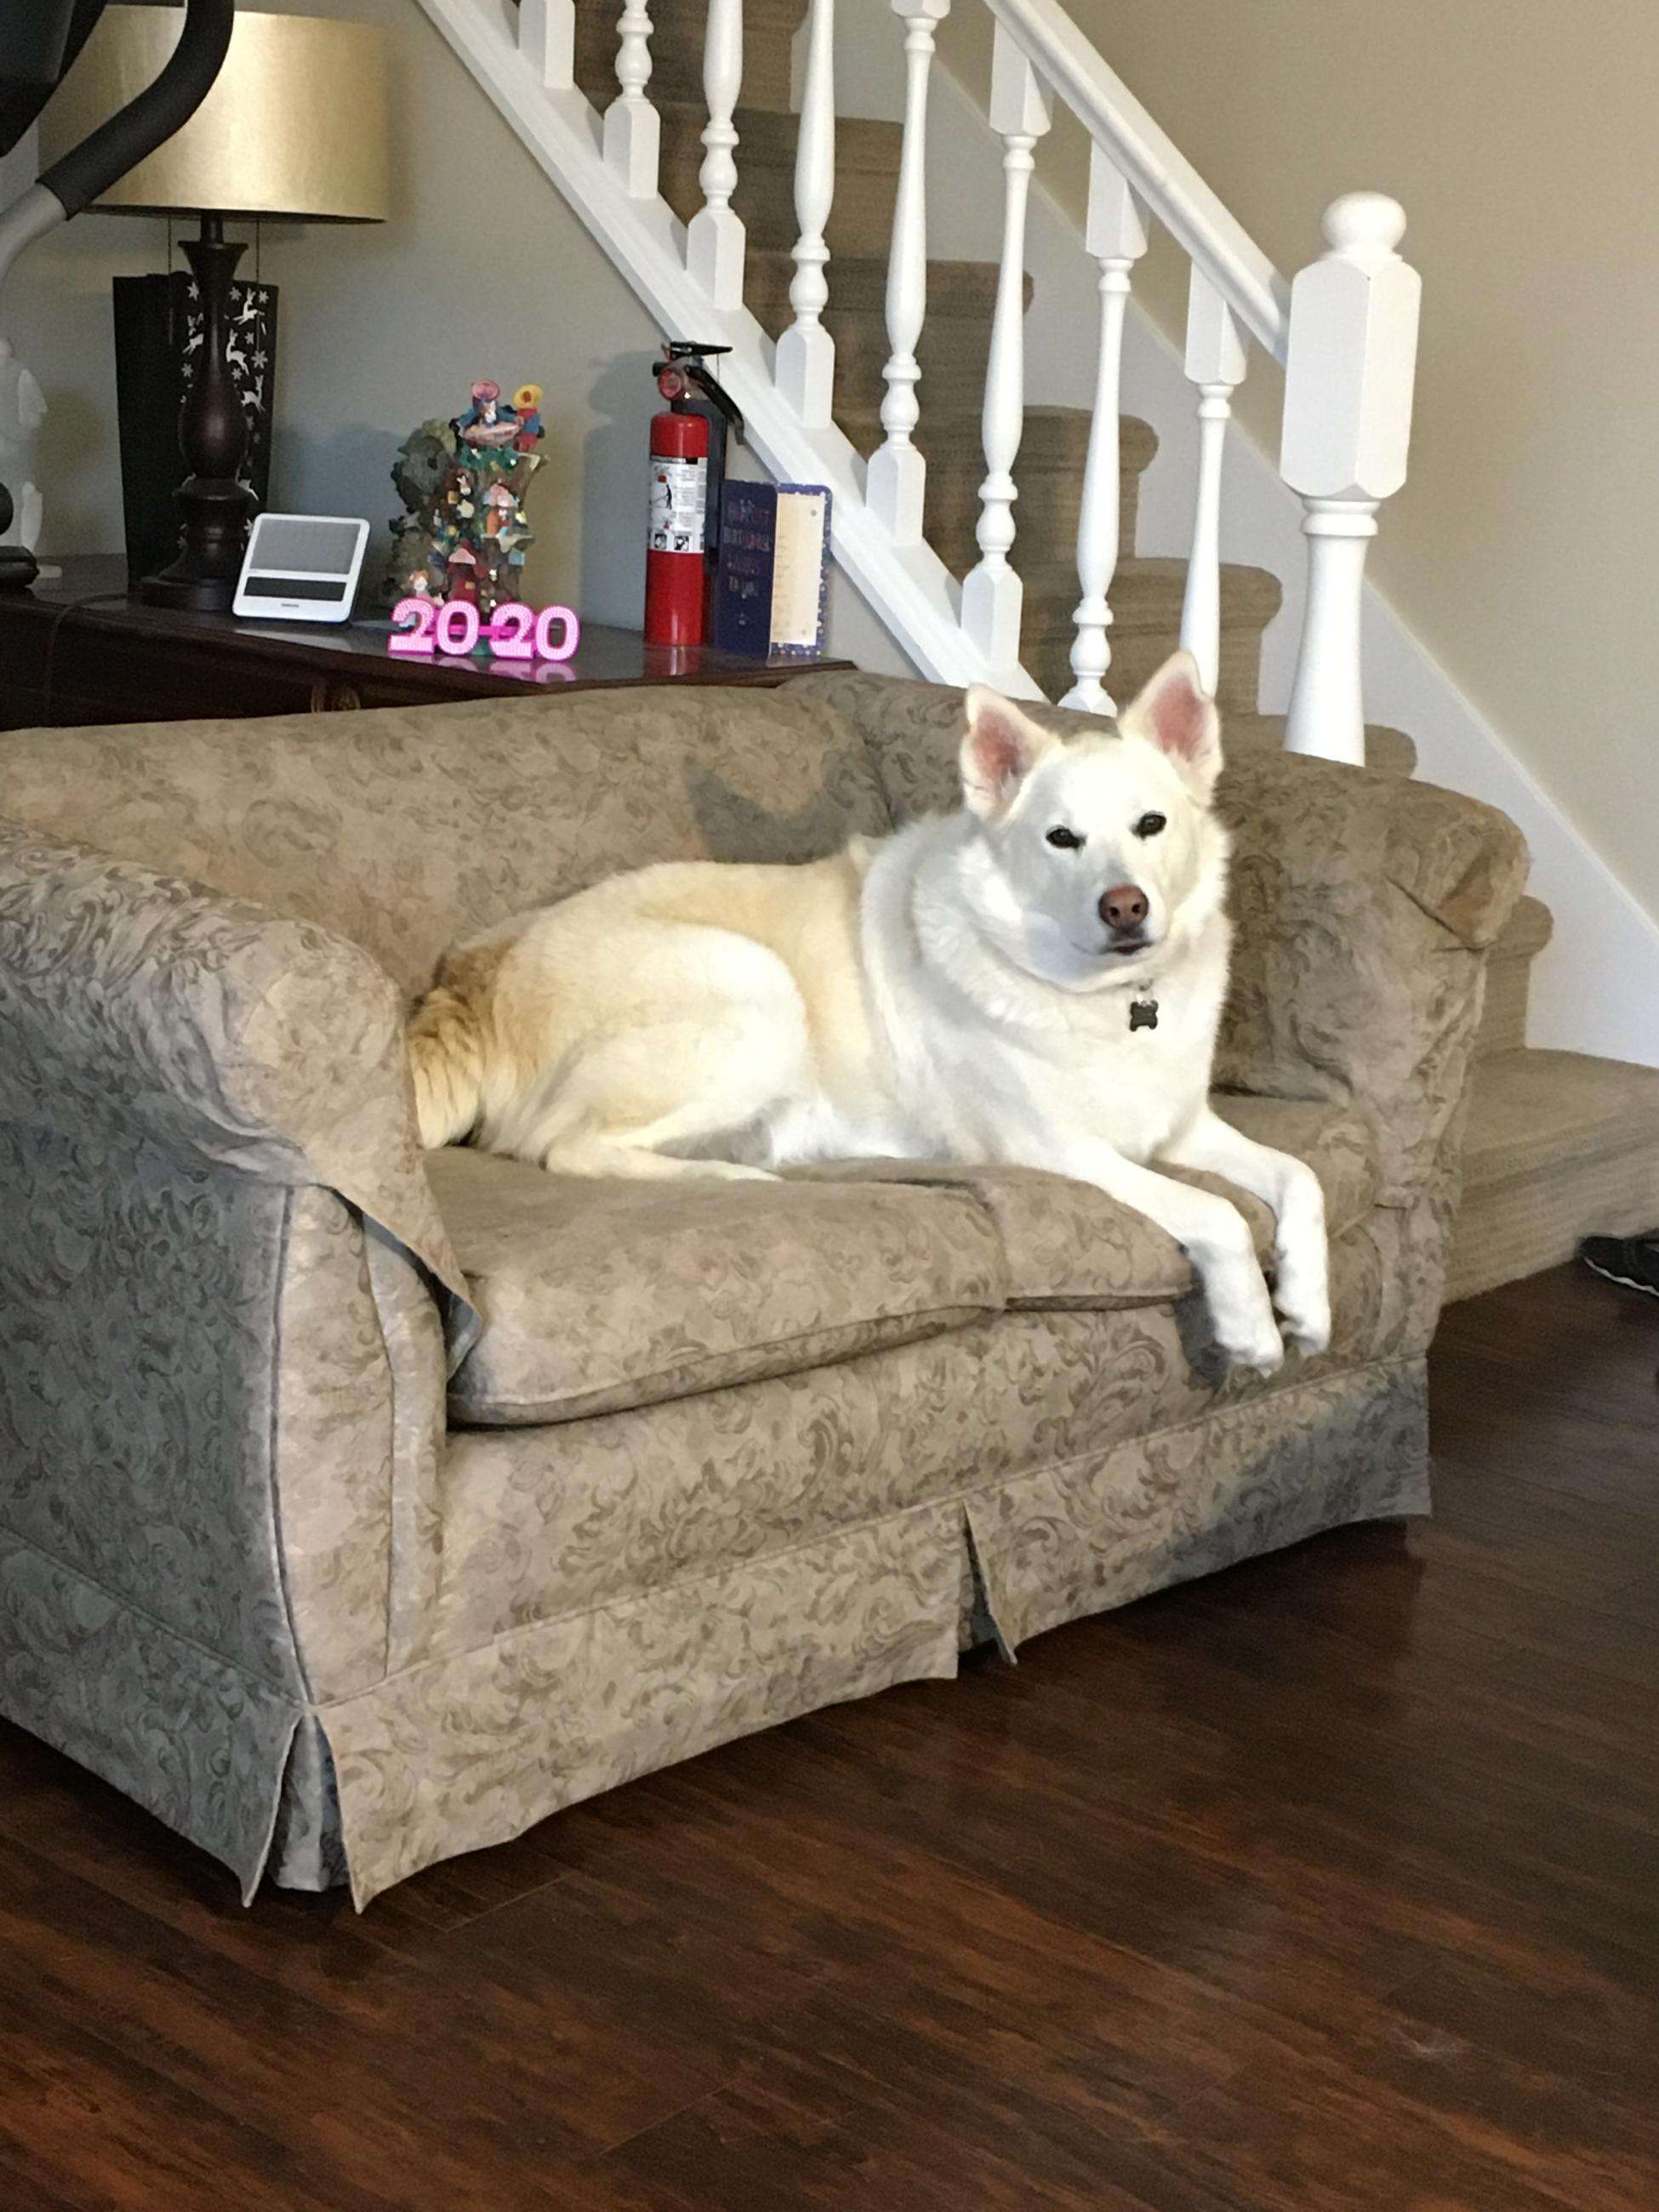 Dog on Couch